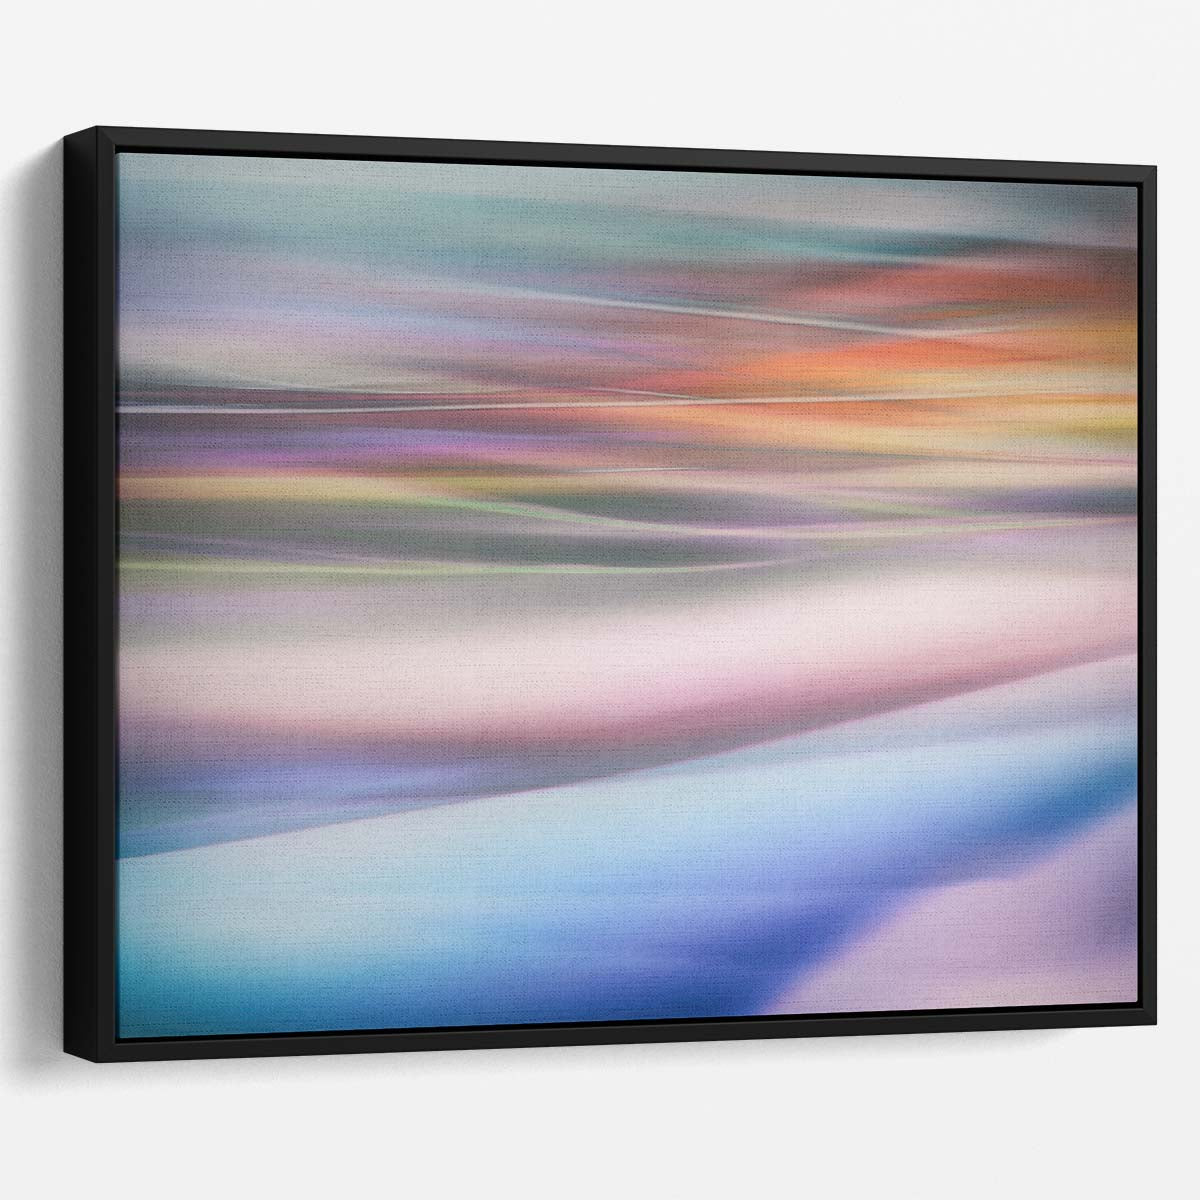 Colorful Pastel Seascape & Sunset Abstract Wall Art by Luxuriance Designs. Made in USA.